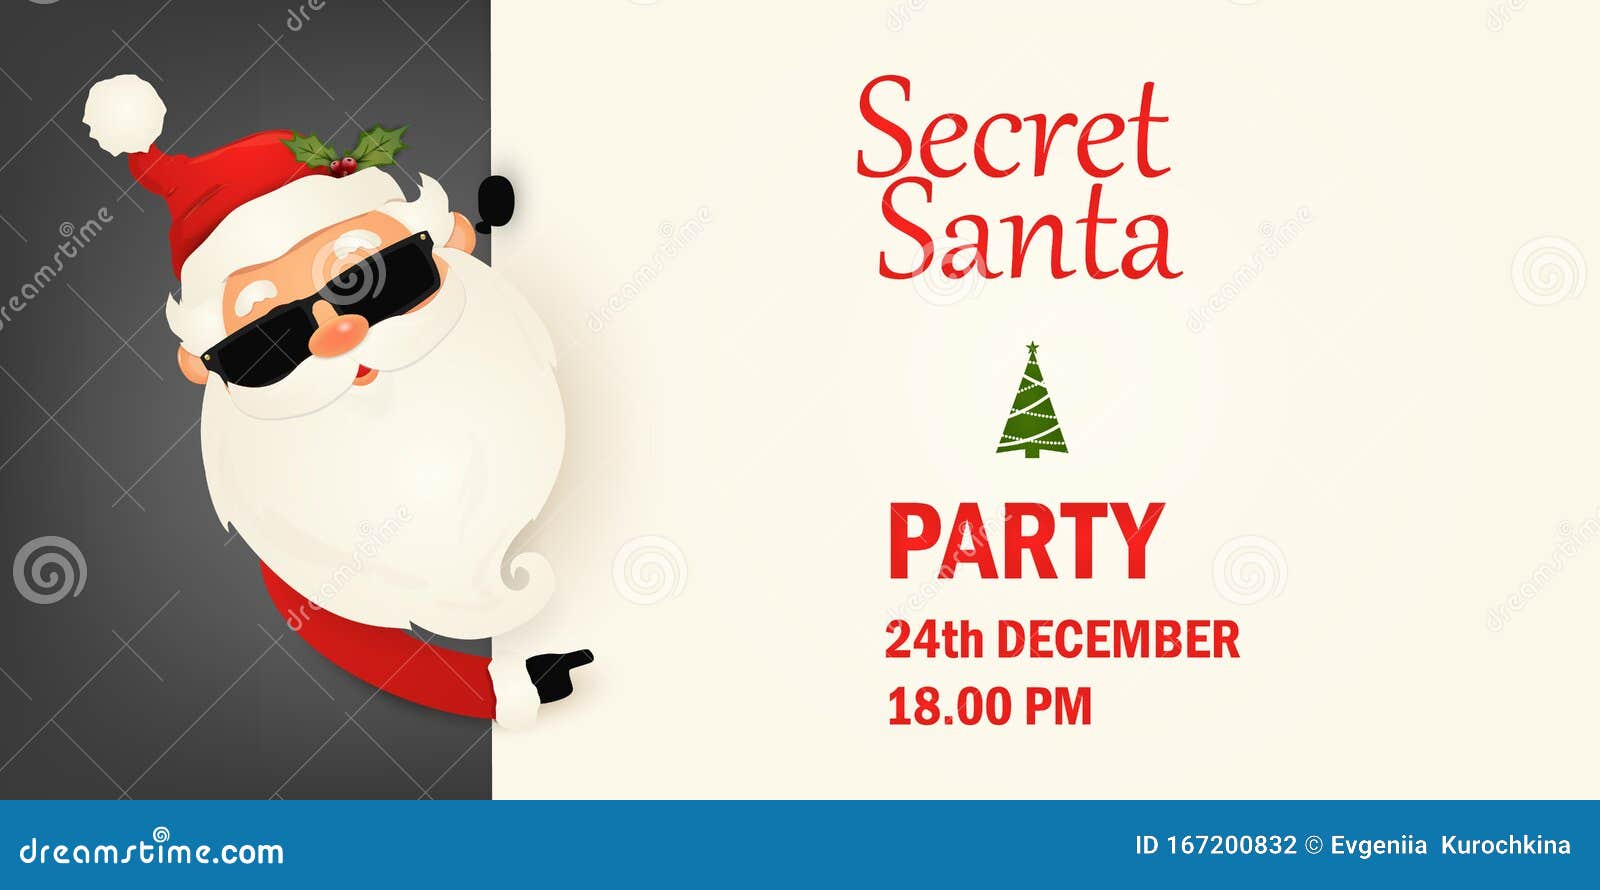 https://thumbs.dreamstime.com/z/secret-santa-claus-invitation-background-standing-behind-blank-sign-showing-big-cartoon-character-holding-placard-white-167200832.jpg